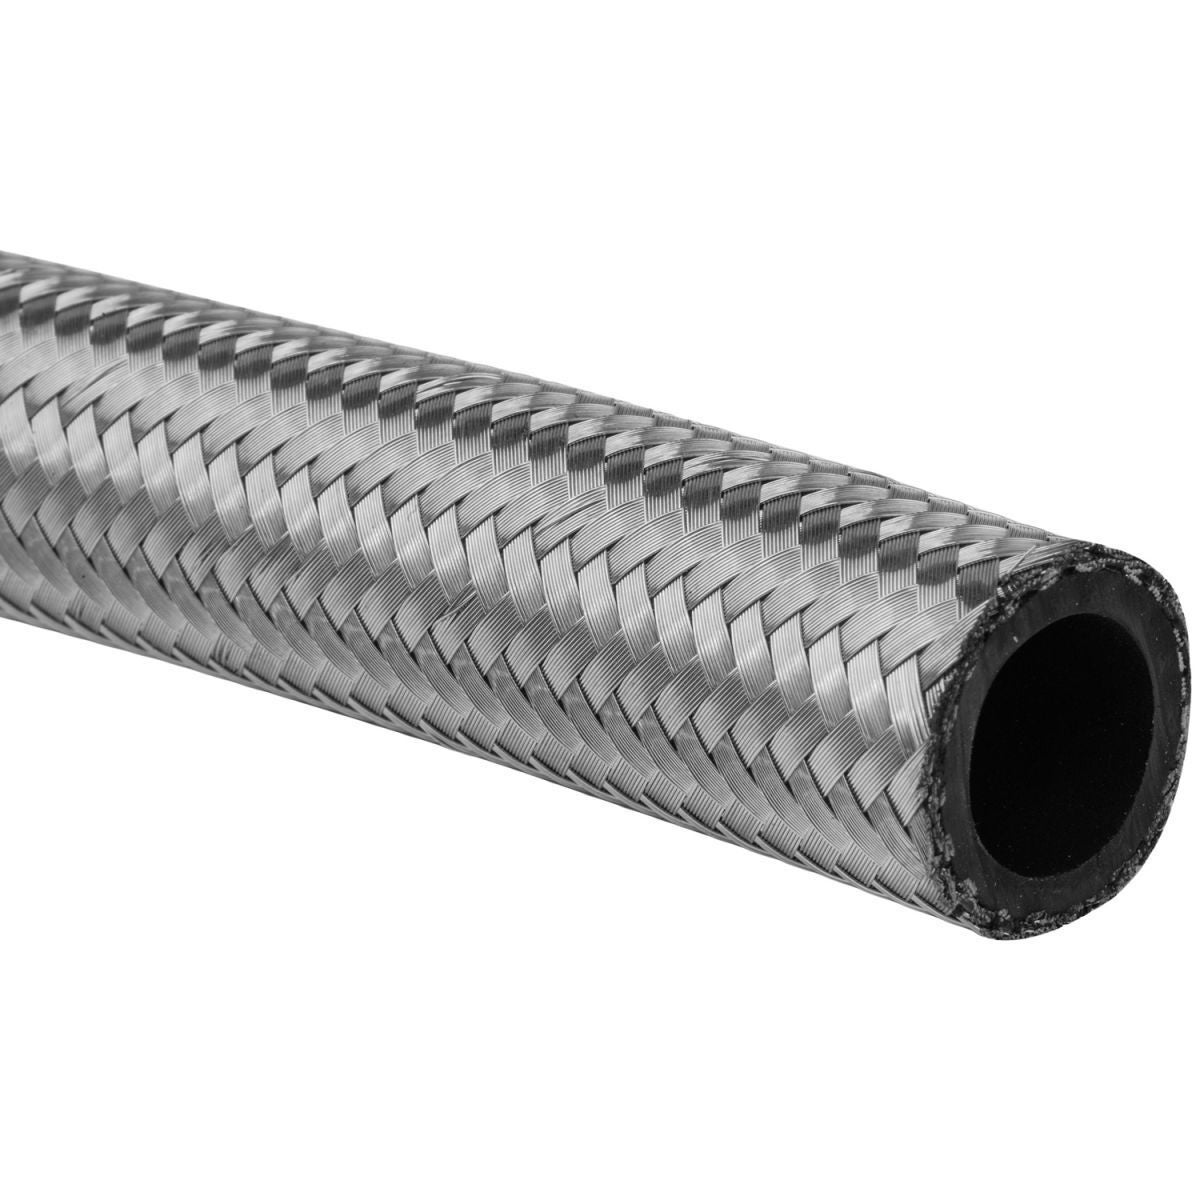 Proflow Stainless Braided Hose -10AN 3 Metre Length PFE100-10R-3